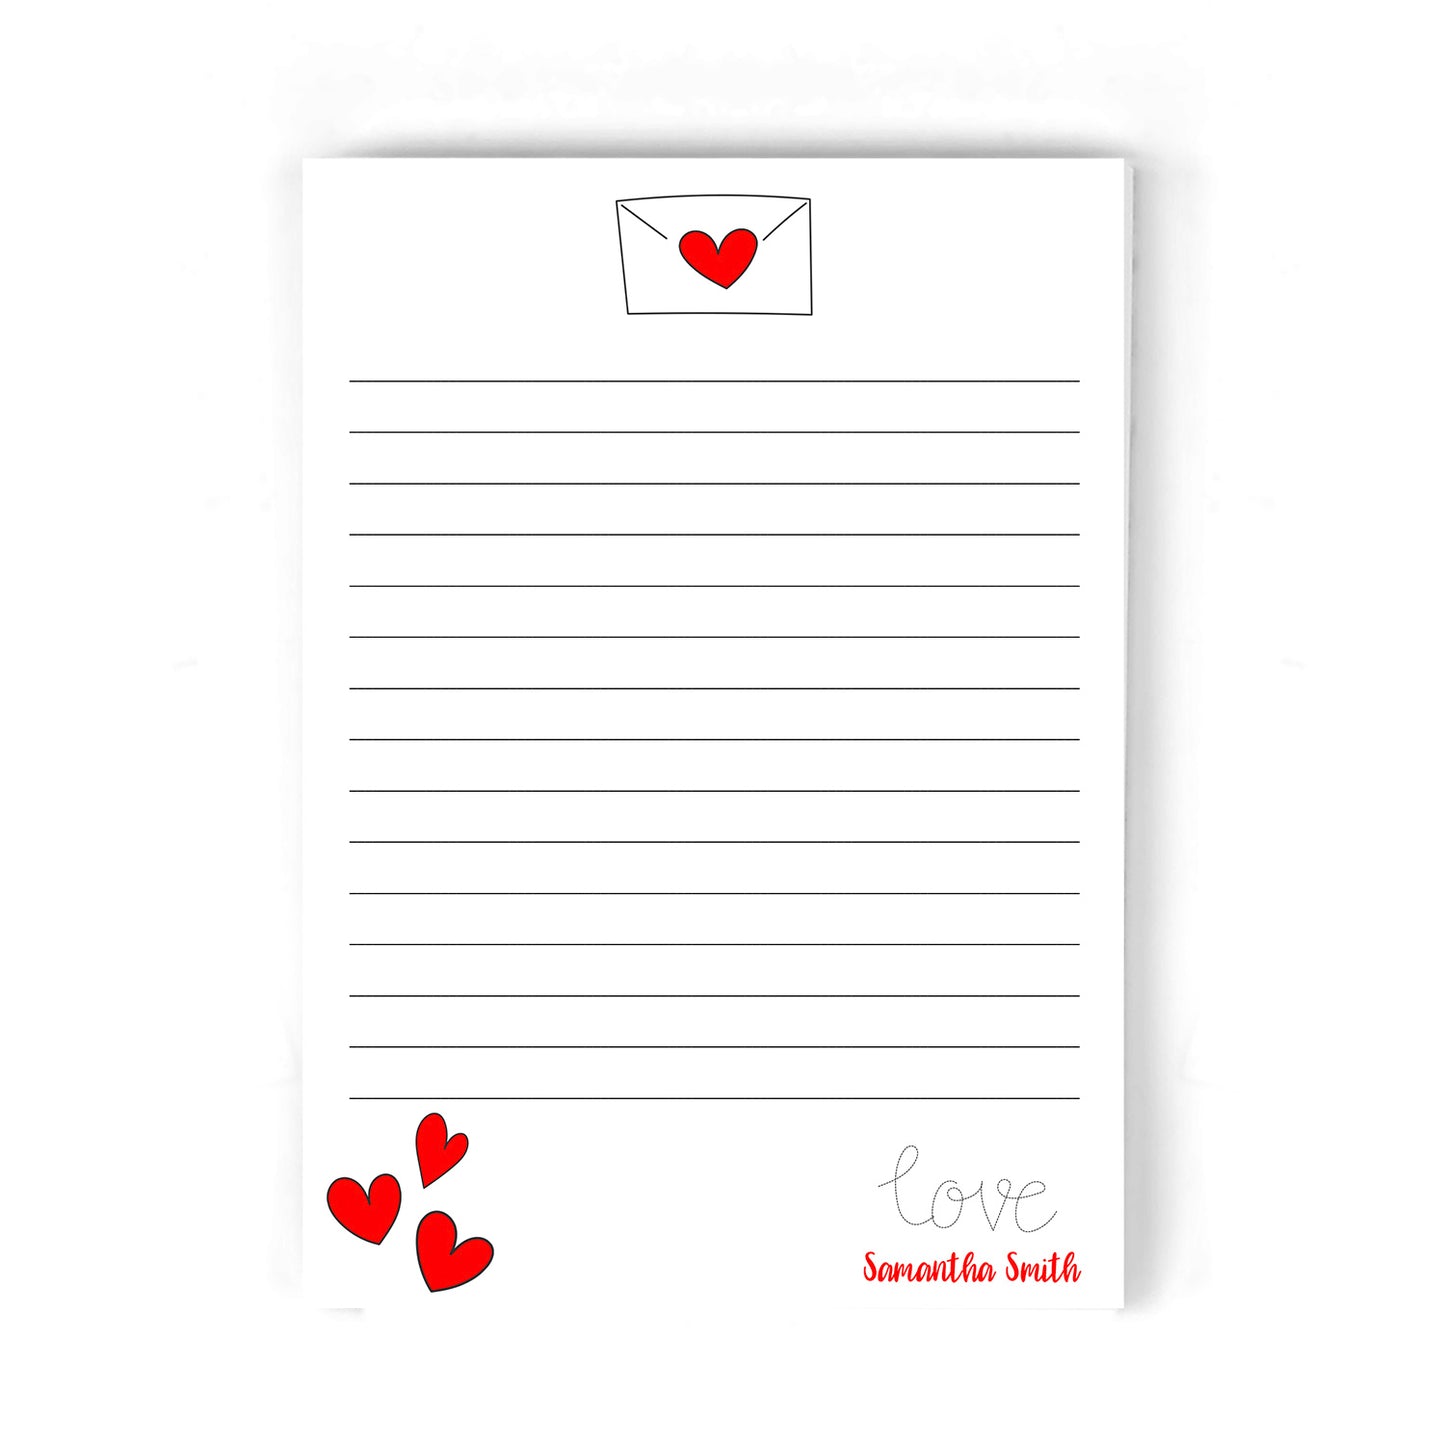 Sent with Love Notepad